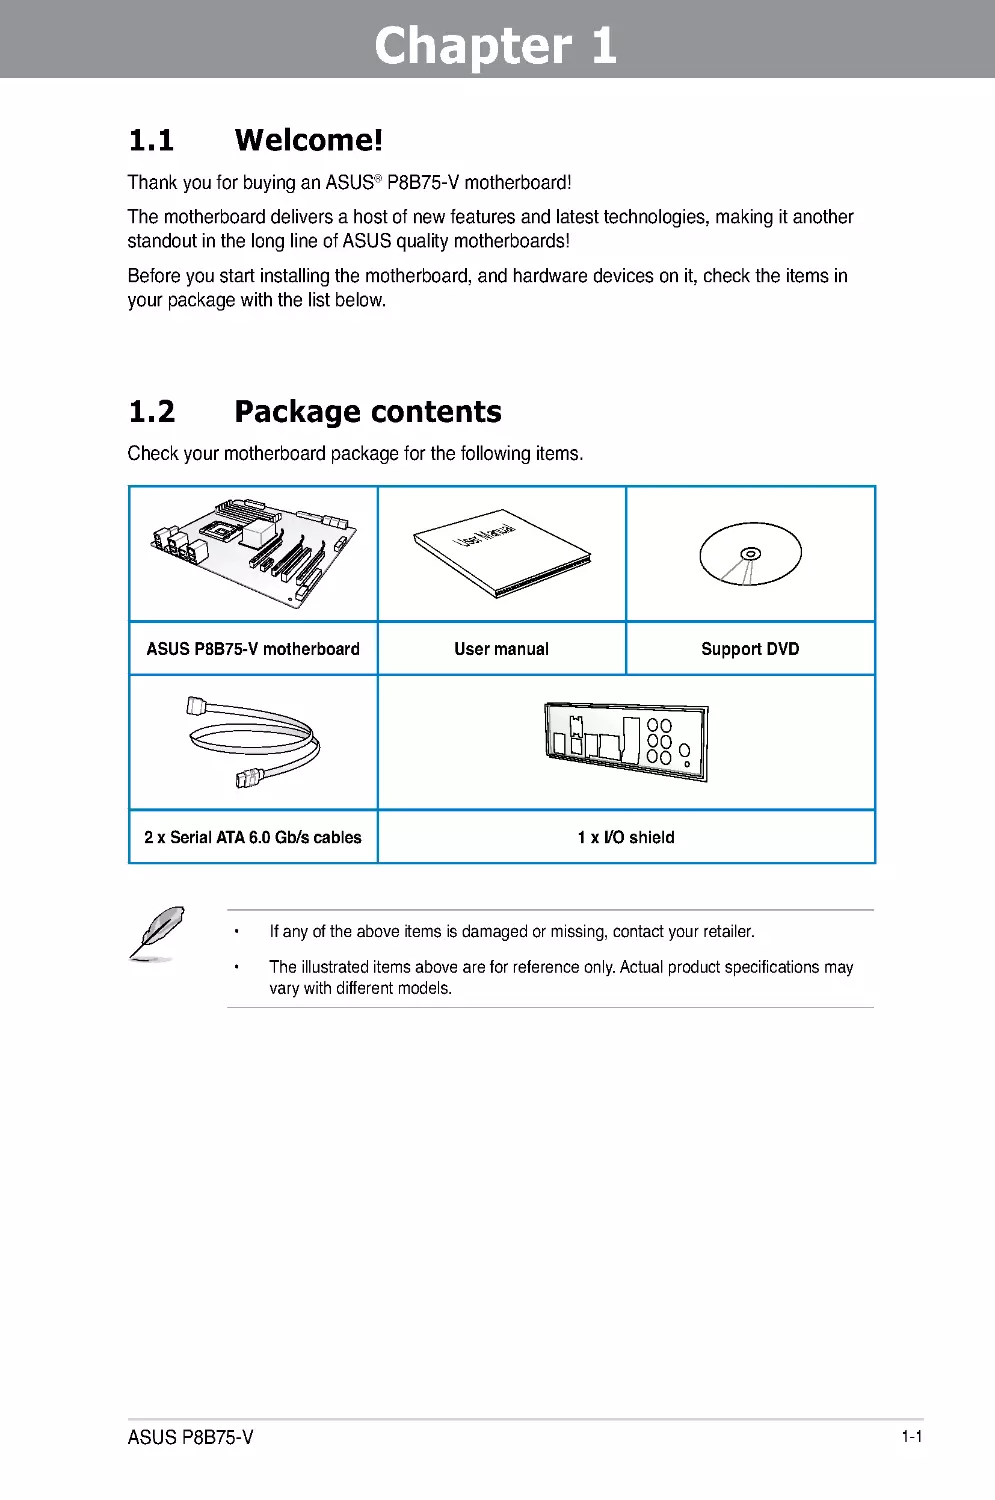 Chapter 1:	Product introduction
1.2	Package contents